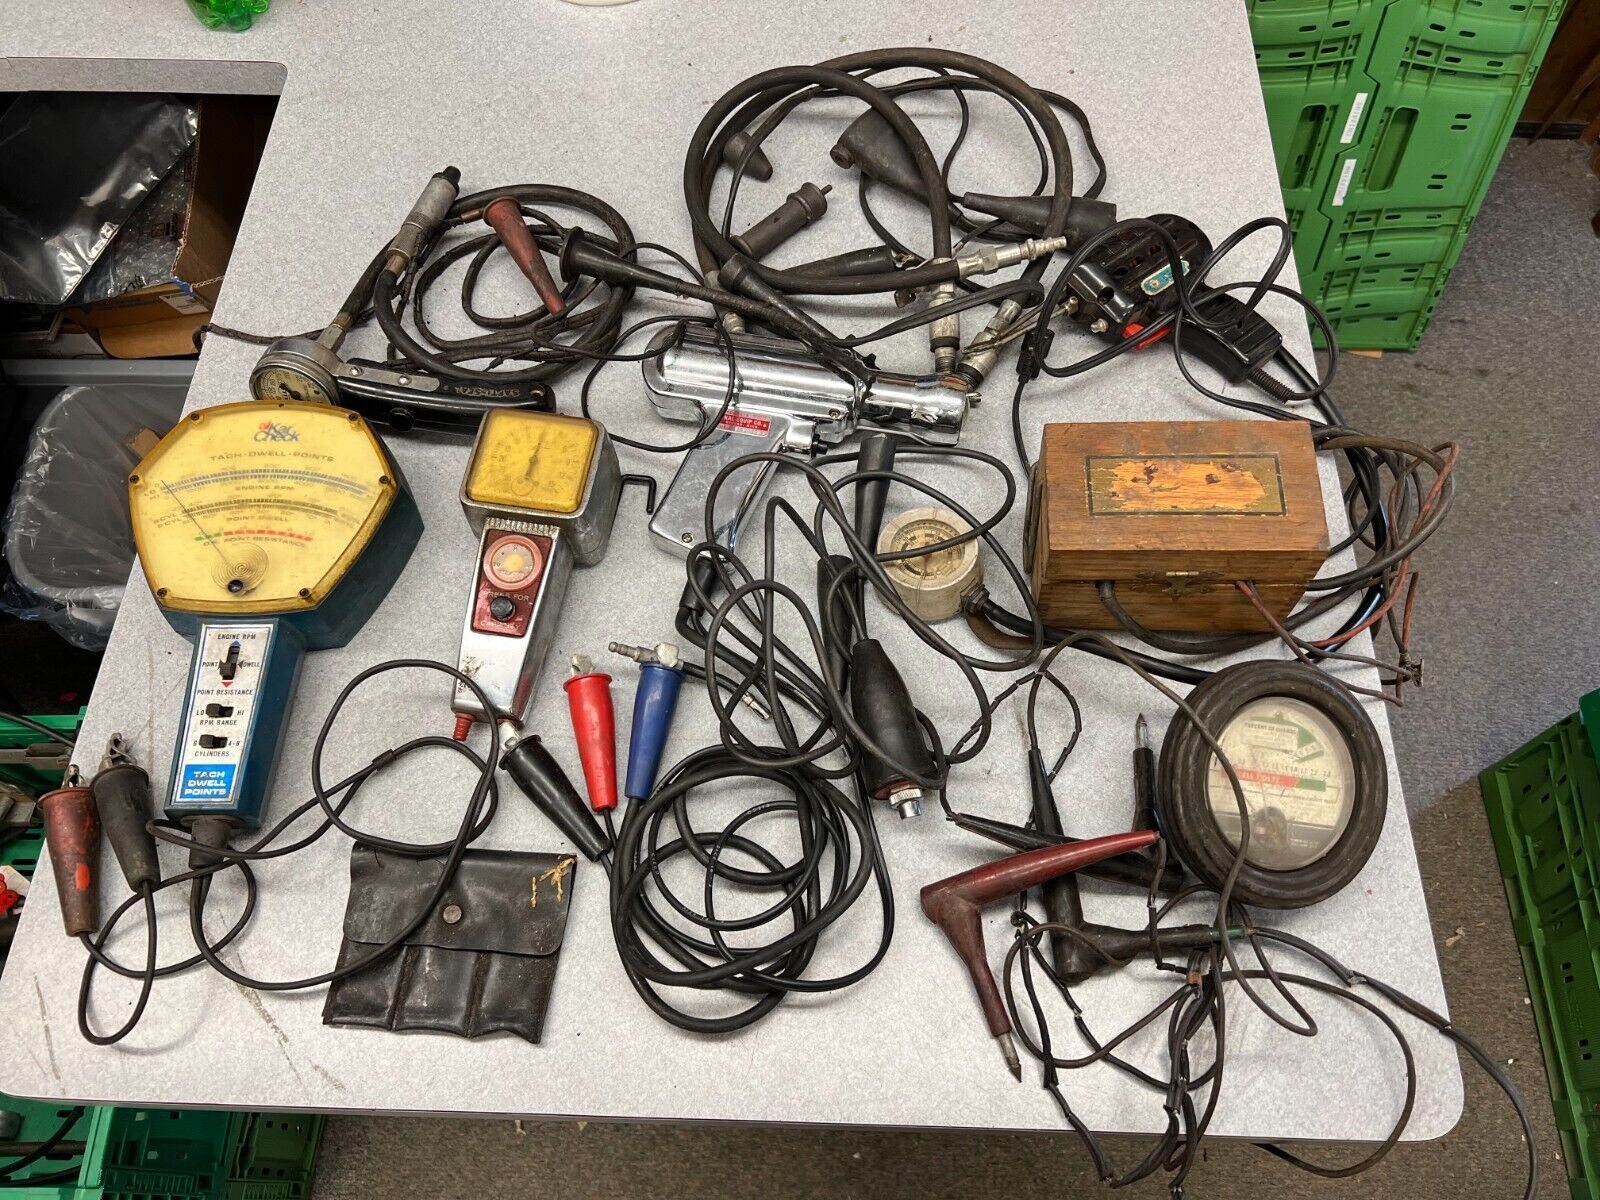 Mechanics/Collectors lot of old Car testing tools, including a Snap-On MT 302